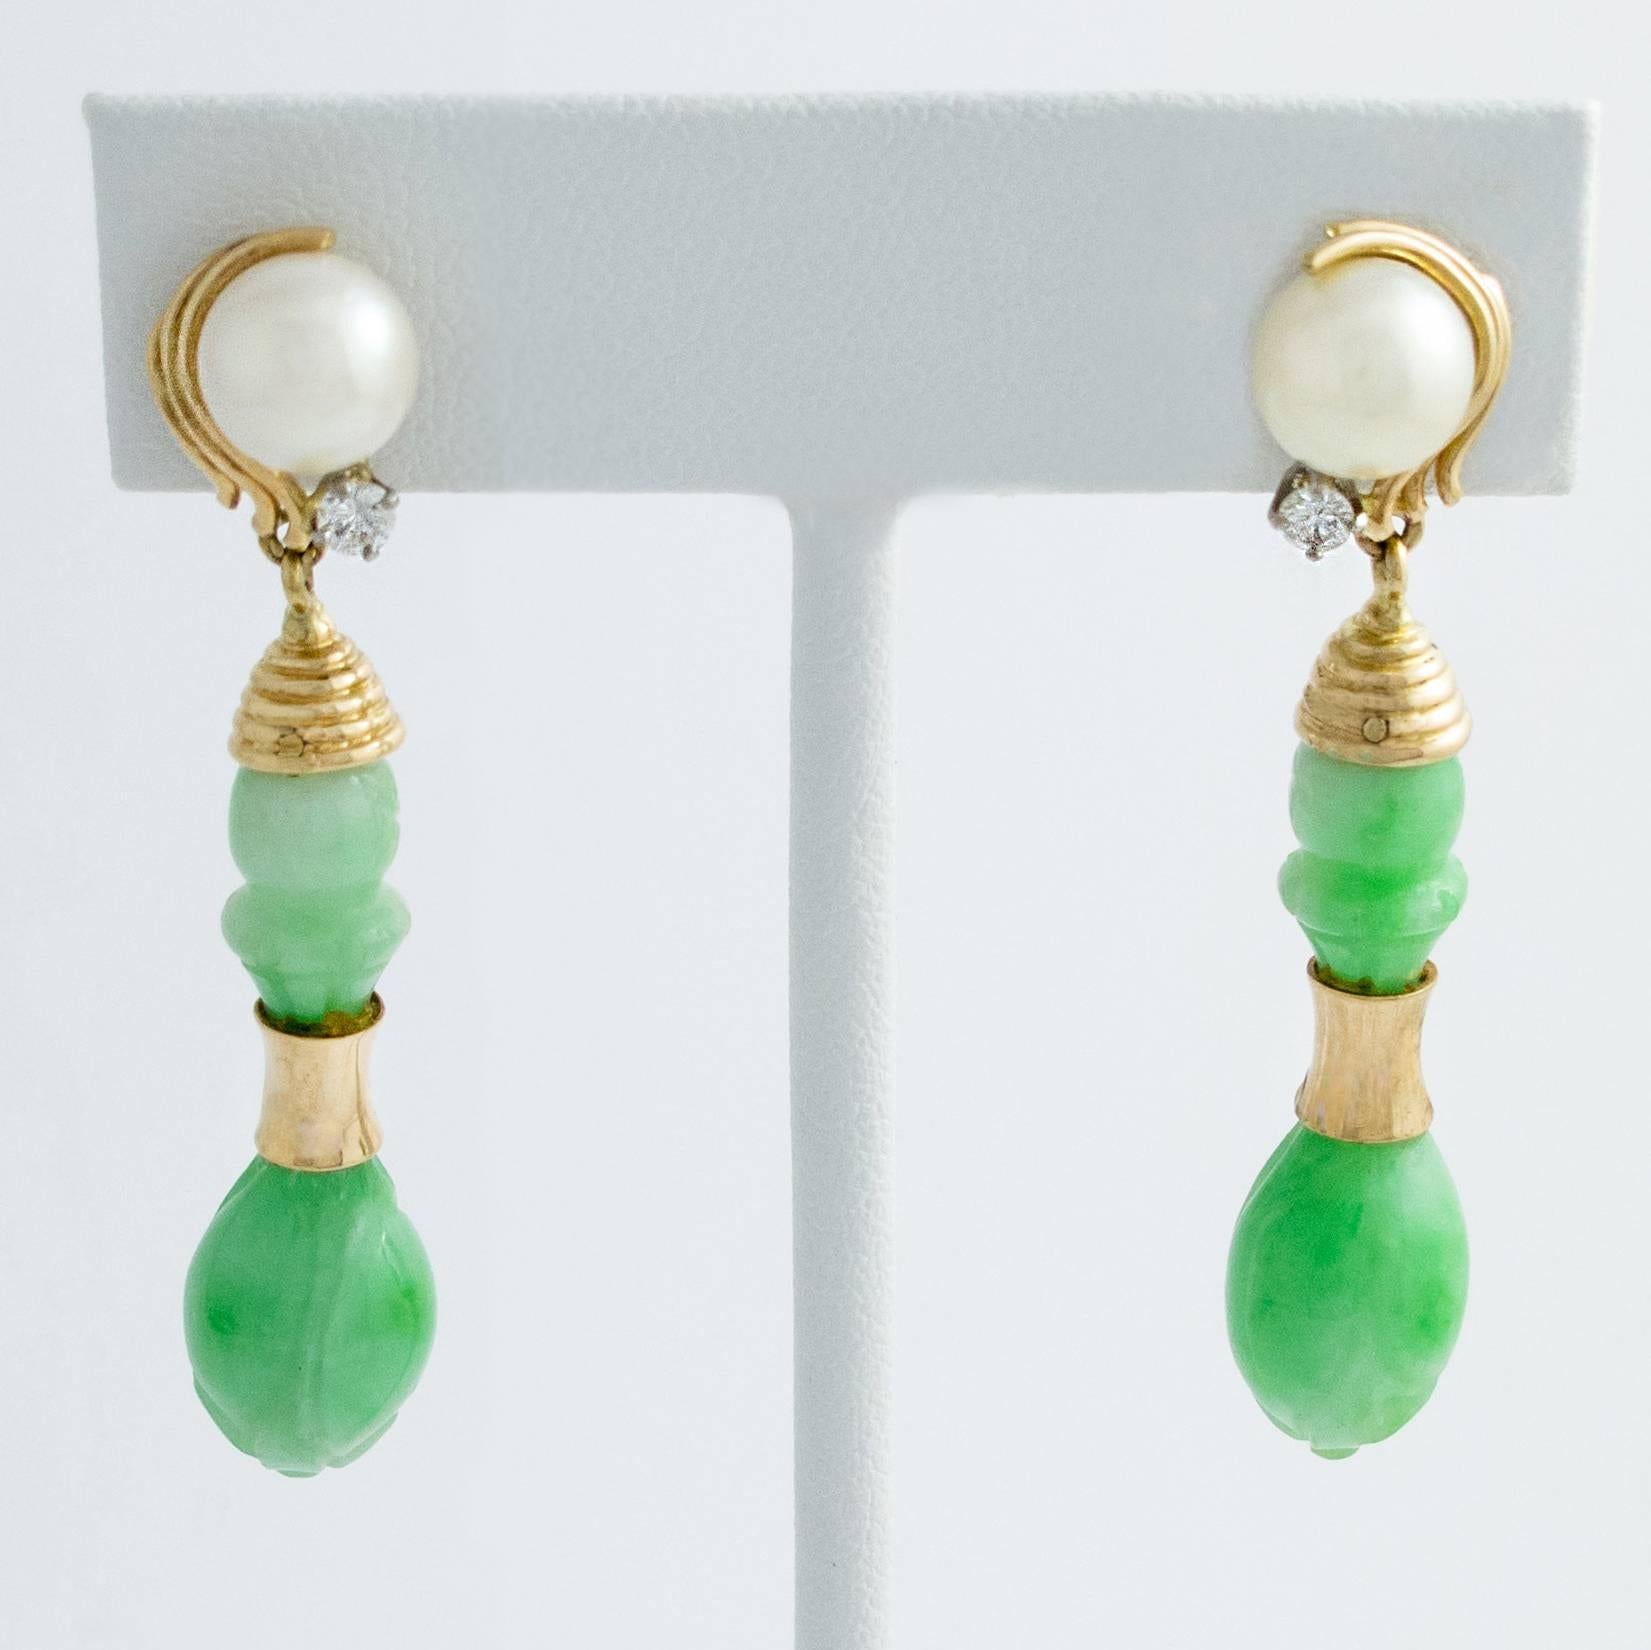 Pretty carved Jade drops are suspended below 6mm Salt Water Cultured Pearls, detailed with a single Diamond, in these pretty 14K yellow gold earrings.

The earrings measure 1.75 inches from top to bottom with the Jade drops alone being 1.25 inches